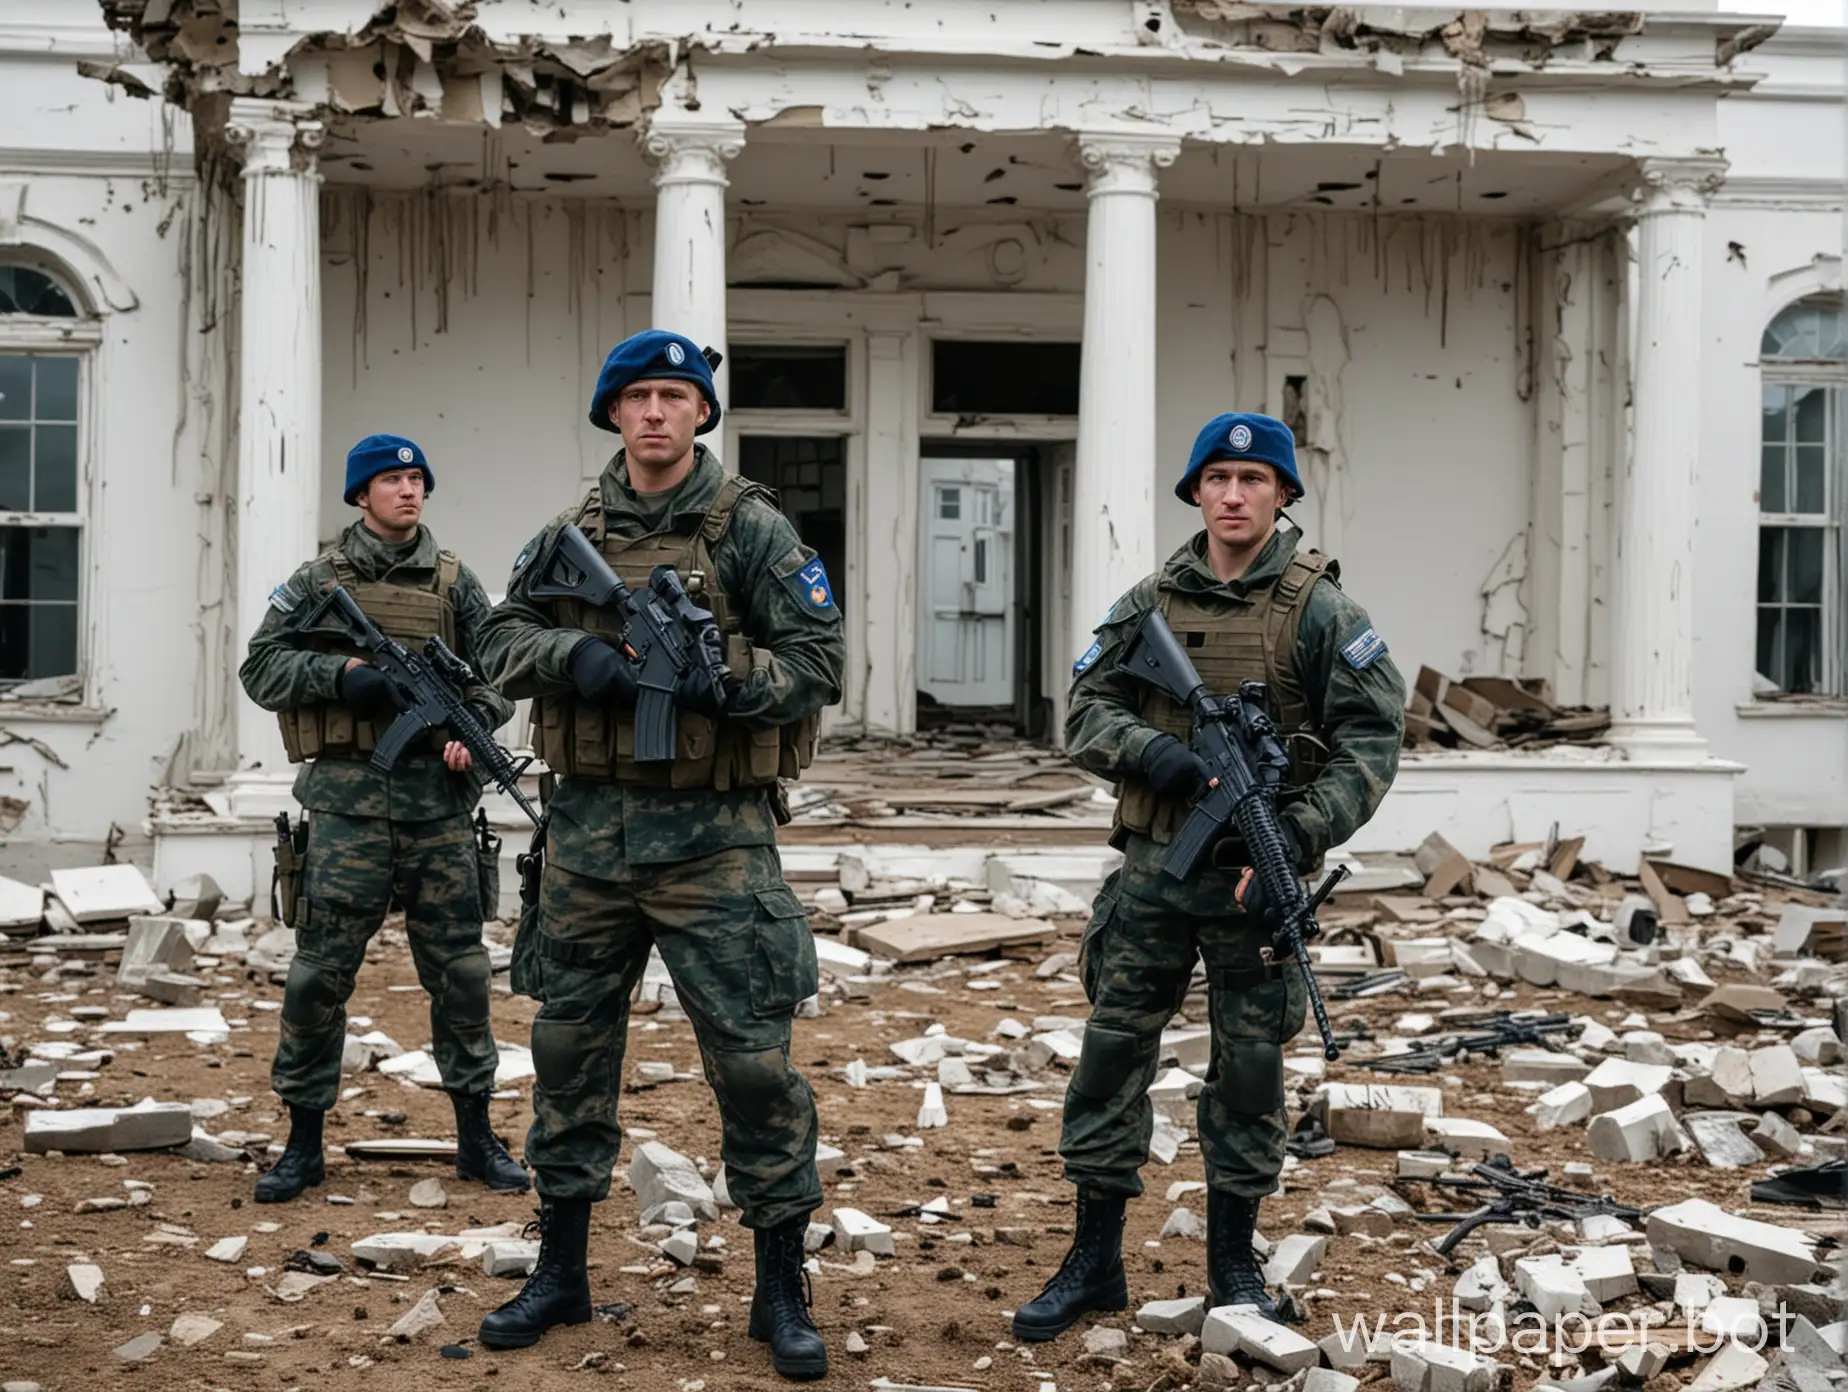 VDV-Soldiers-Guarding-Ruined-White-House-in-Washington-with-Automatic-Weapons